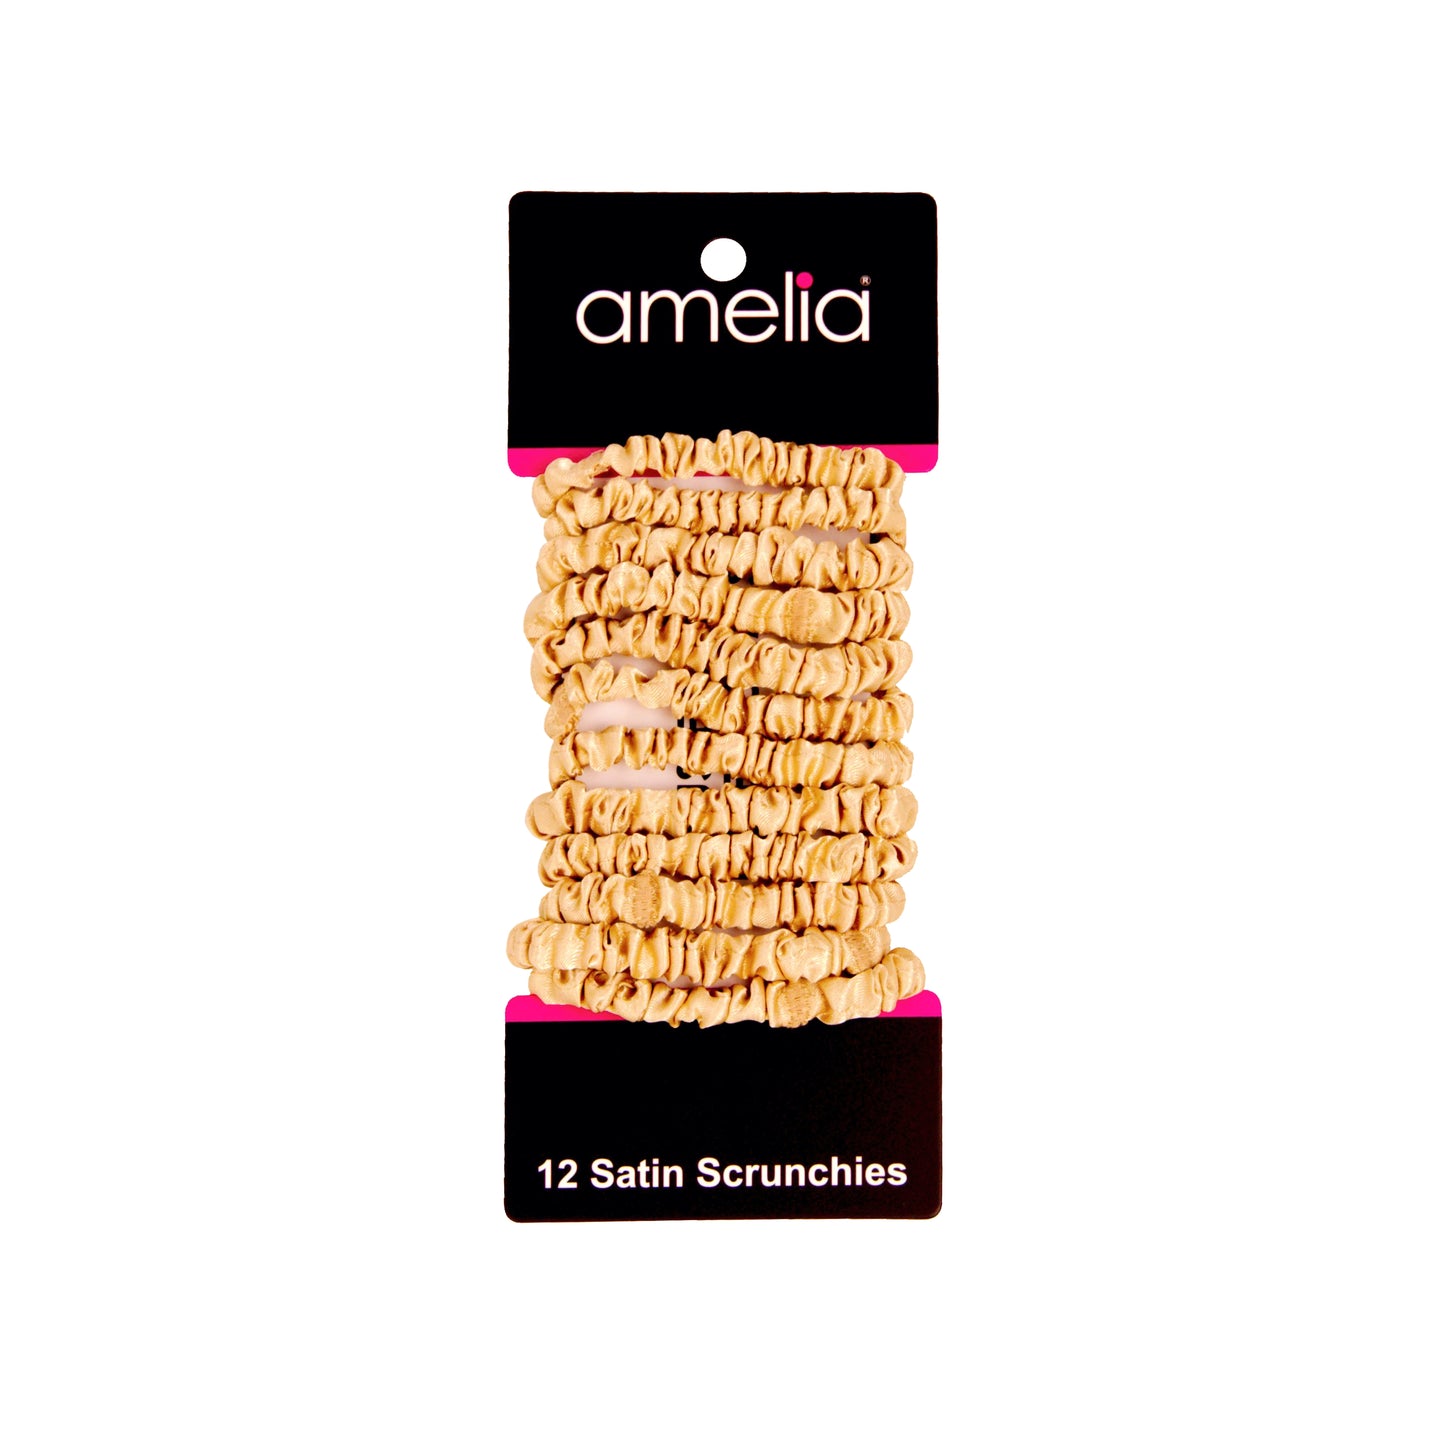 Amelia Beauty, Tan Skinny Satin Scrunchies, 2in Diameter, Gentle and Strong Hold, No Snag, No Dents or Creases. 12 Pack